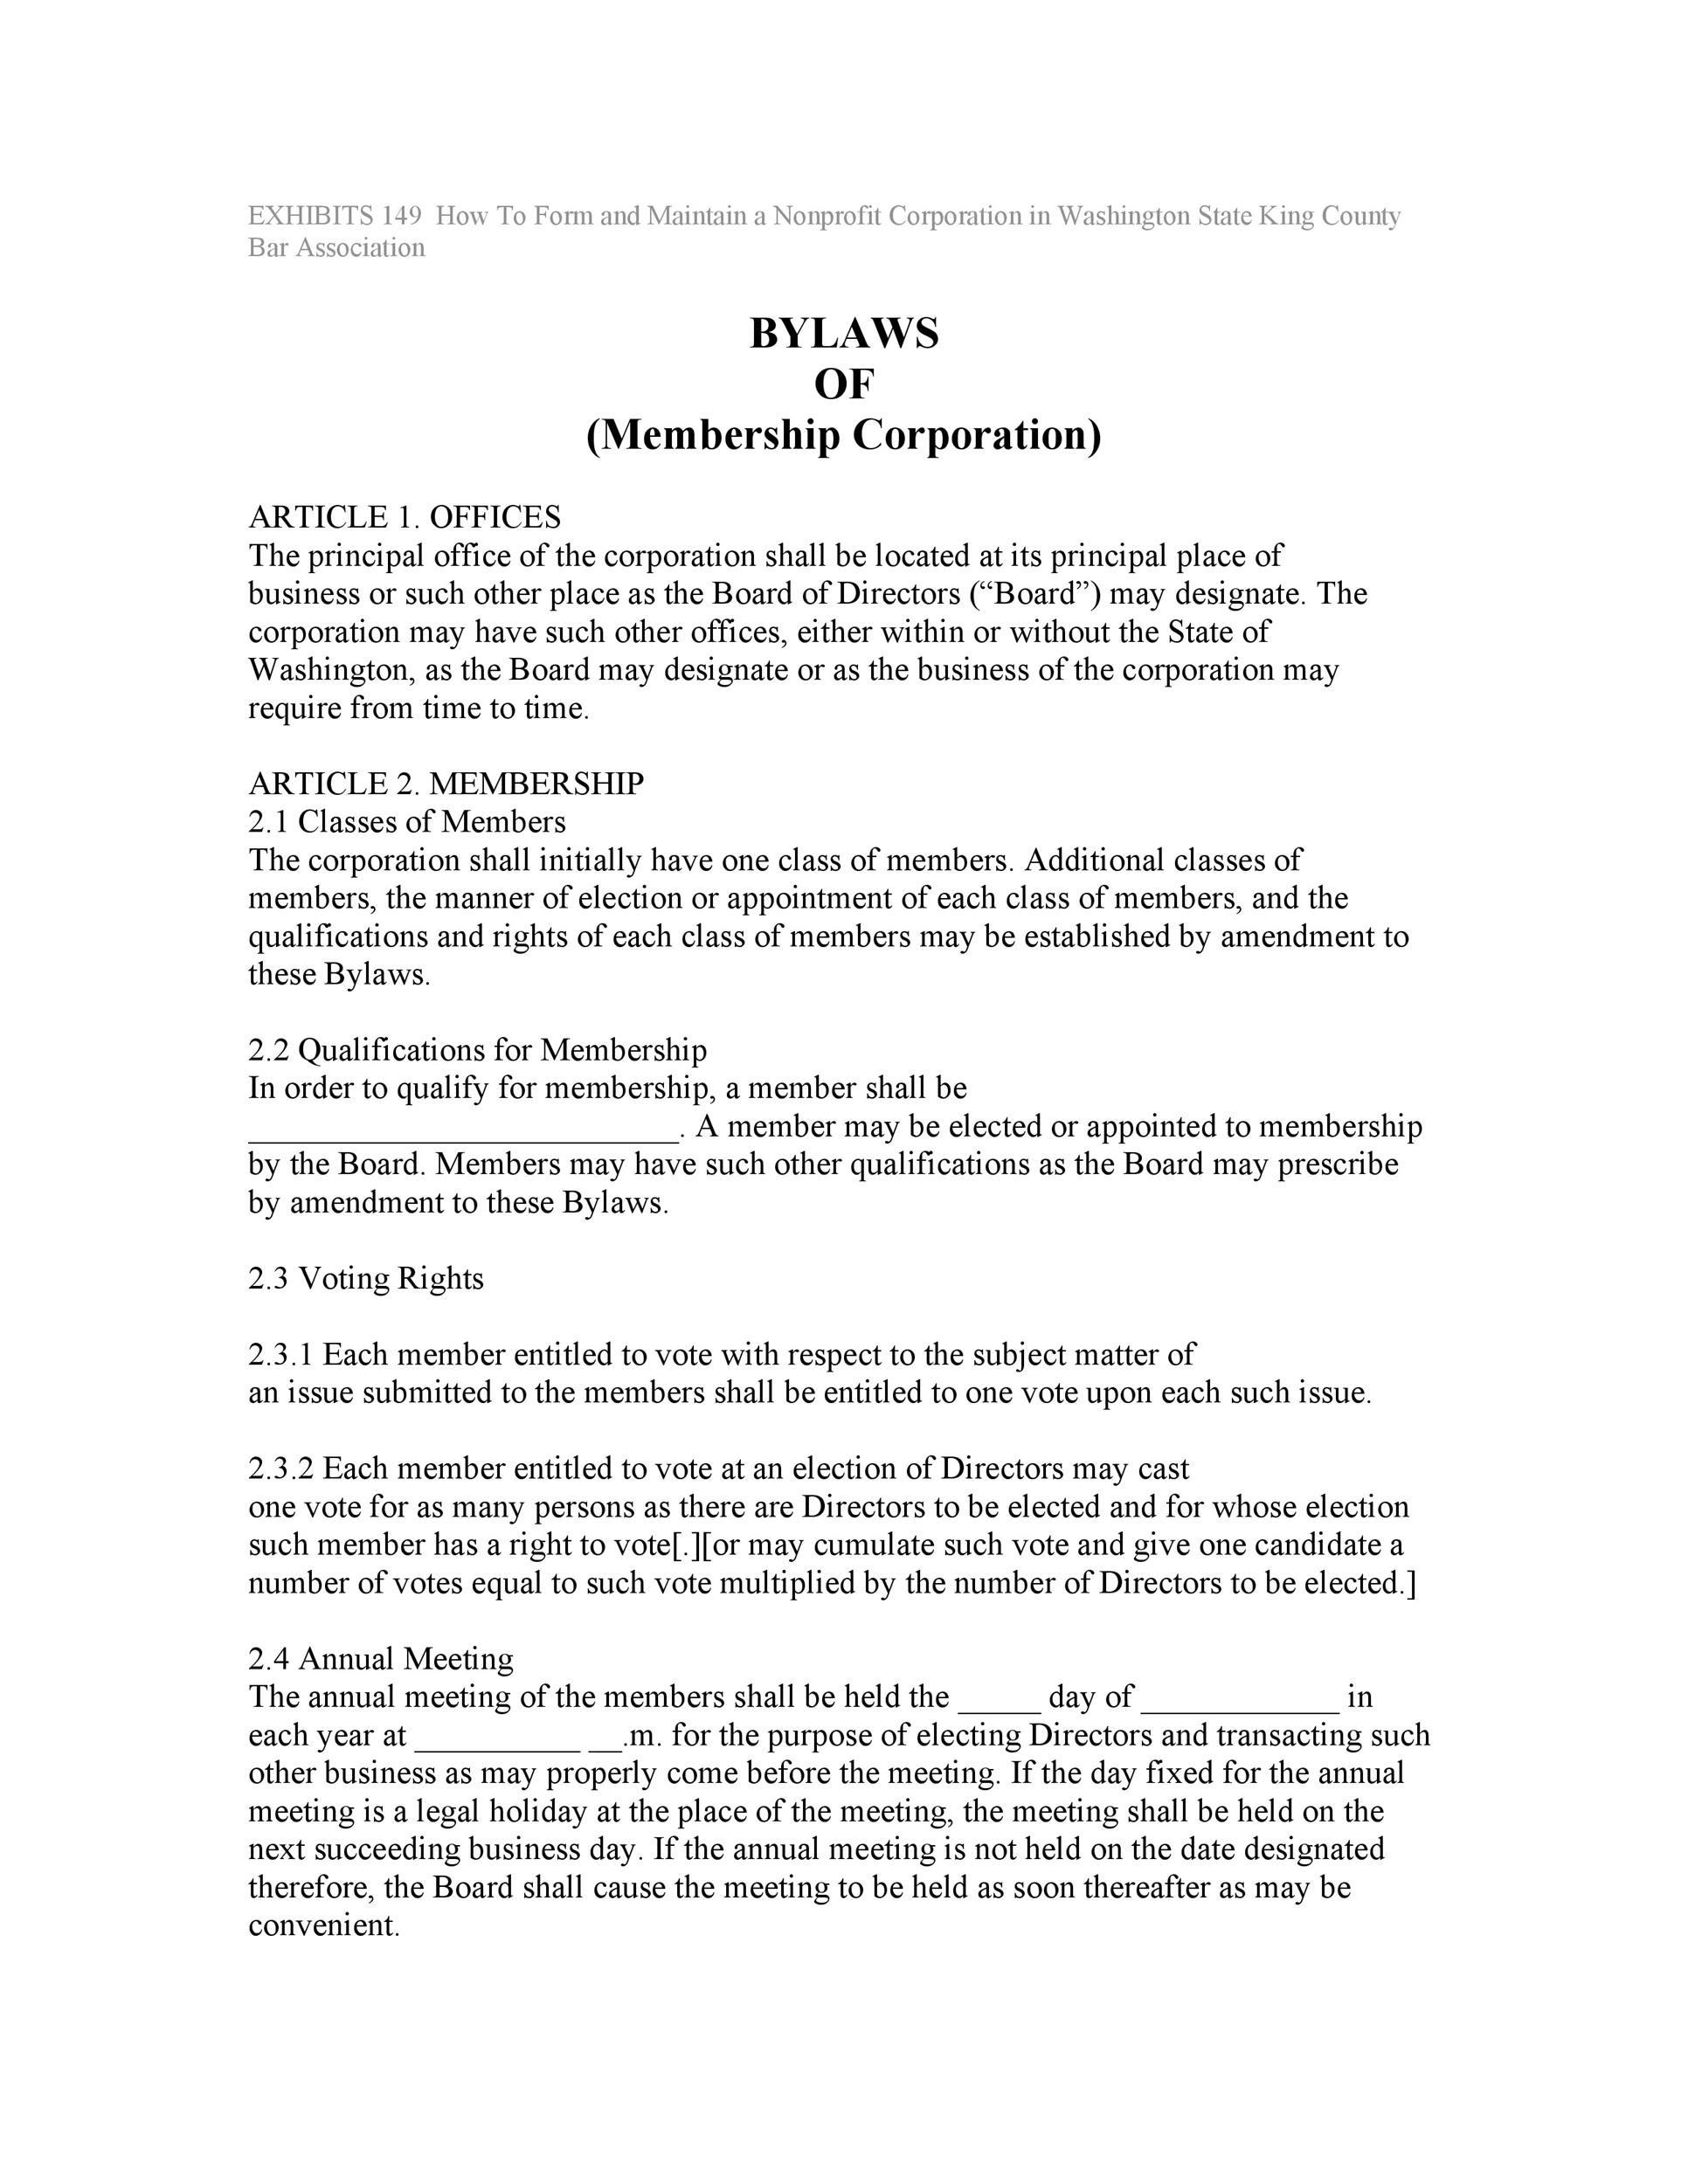 Free corporate bylaws 19